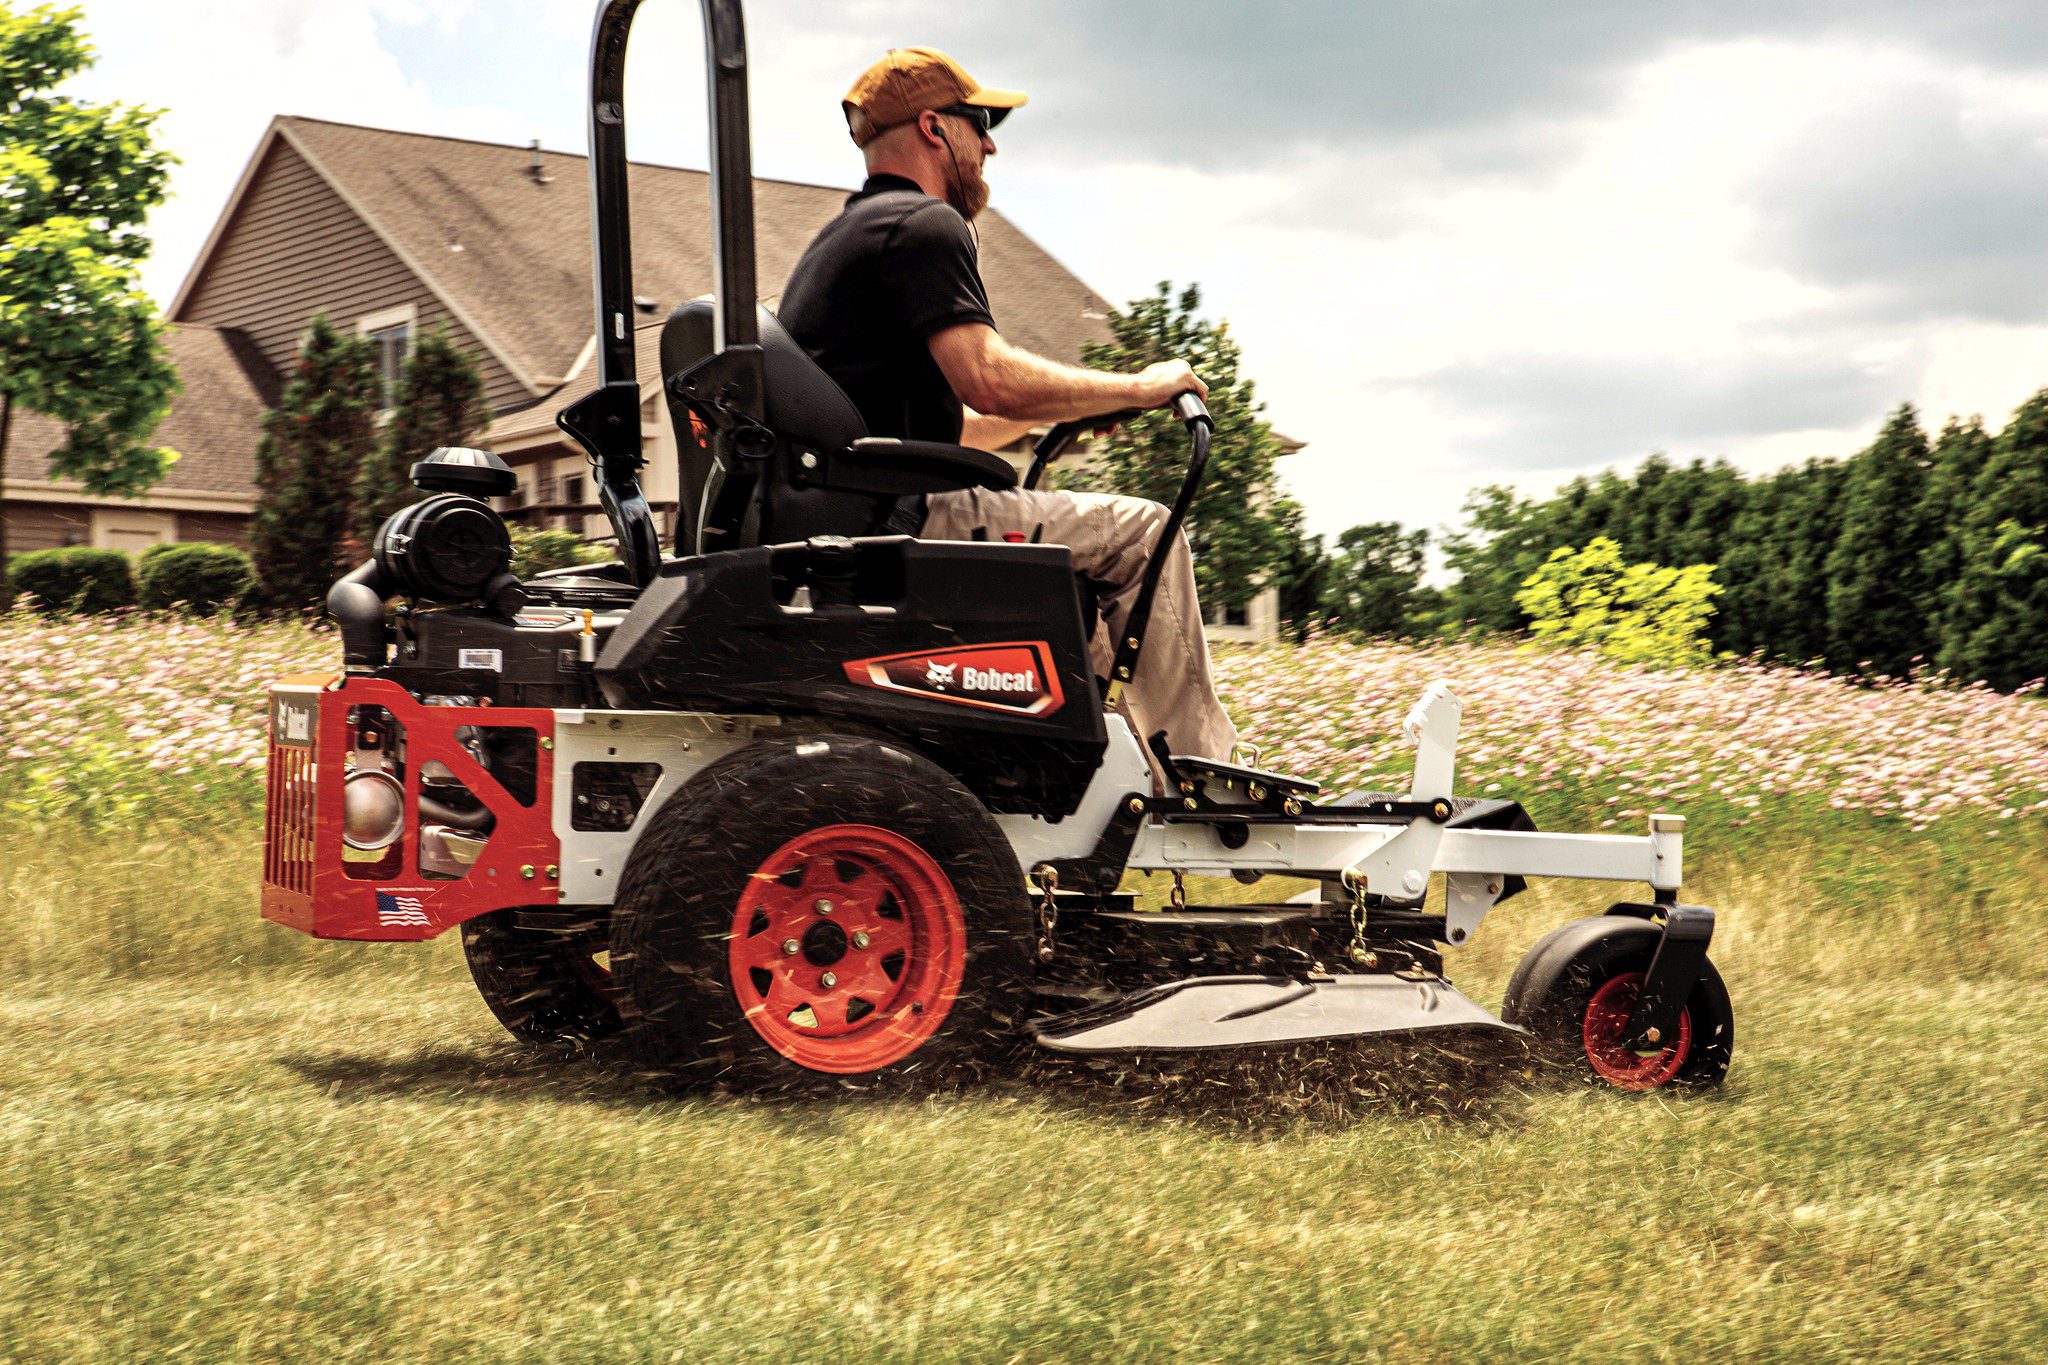 Browse Specs and more for the Bobcat ZT3500 Zero-Turn Mower 61″ - Bobcat of North Texas